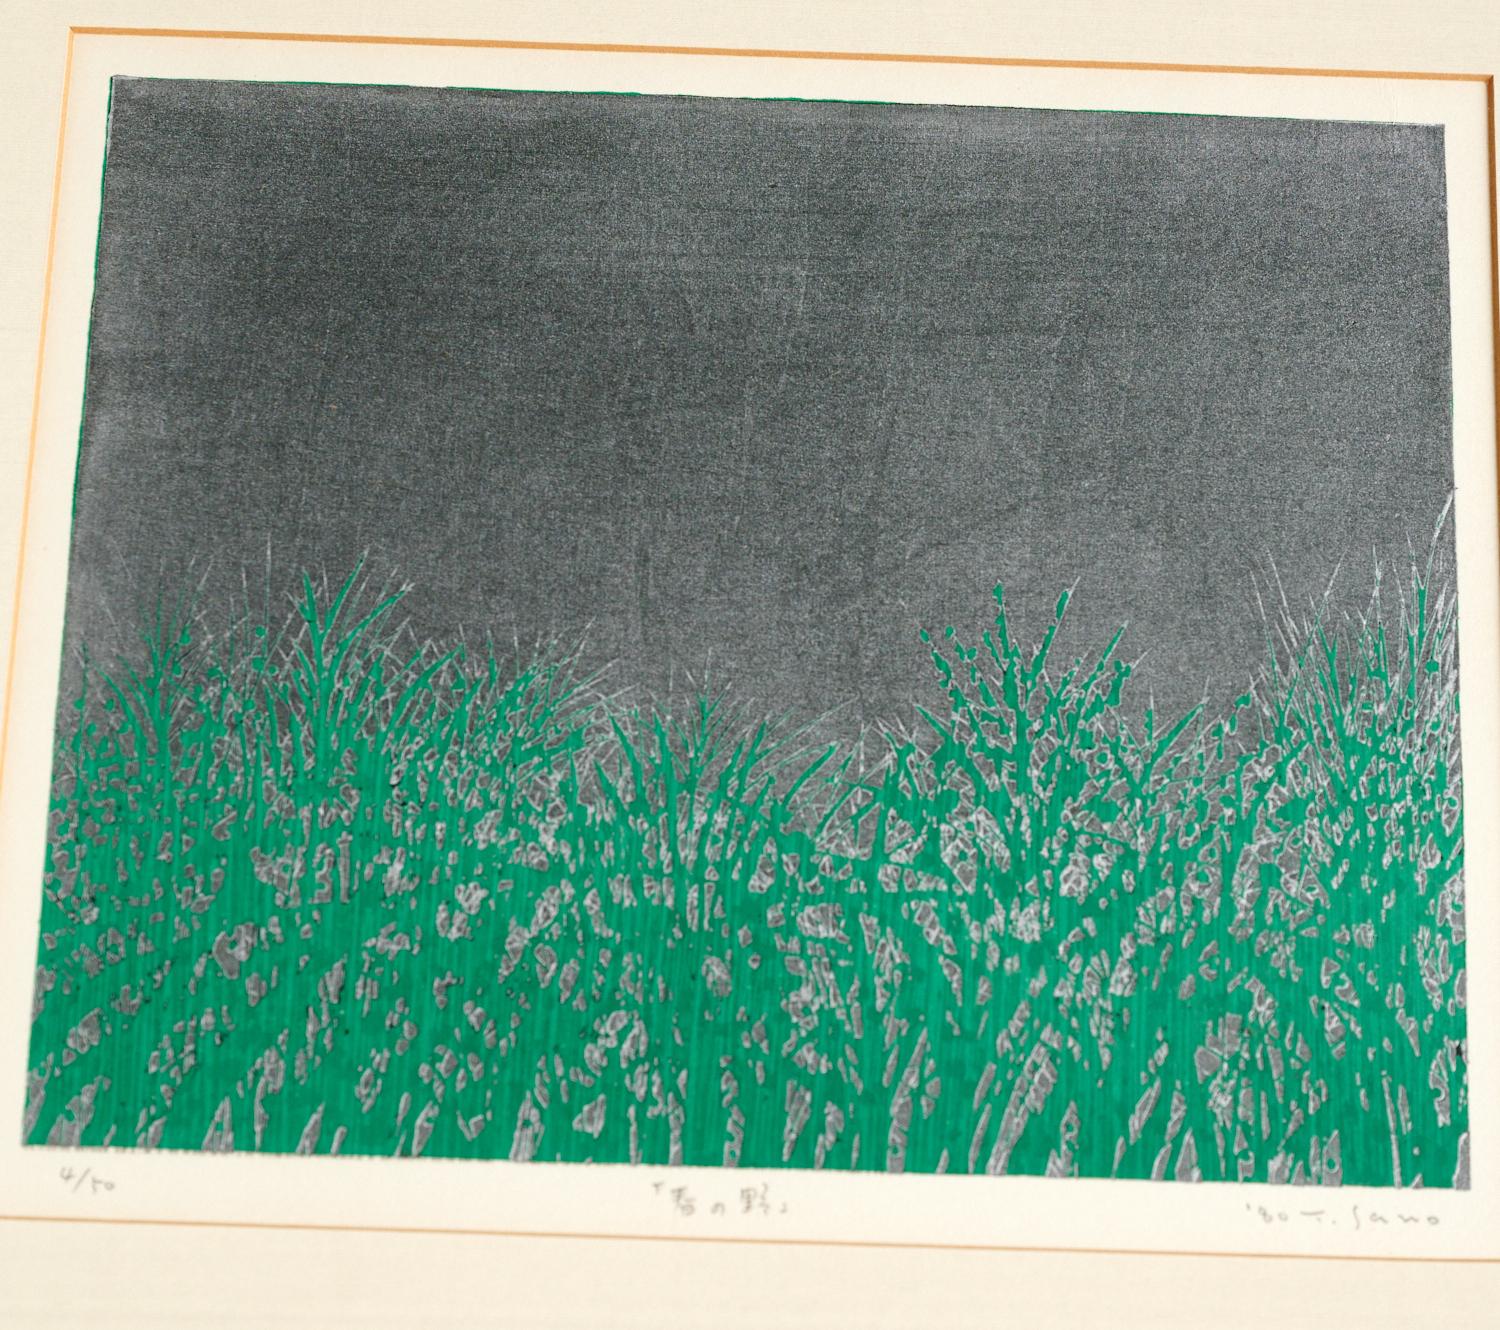 Sano Takao (Japanese, b. 1941), modernist nature themed woodblock print with metallic ink, 1980, signed 